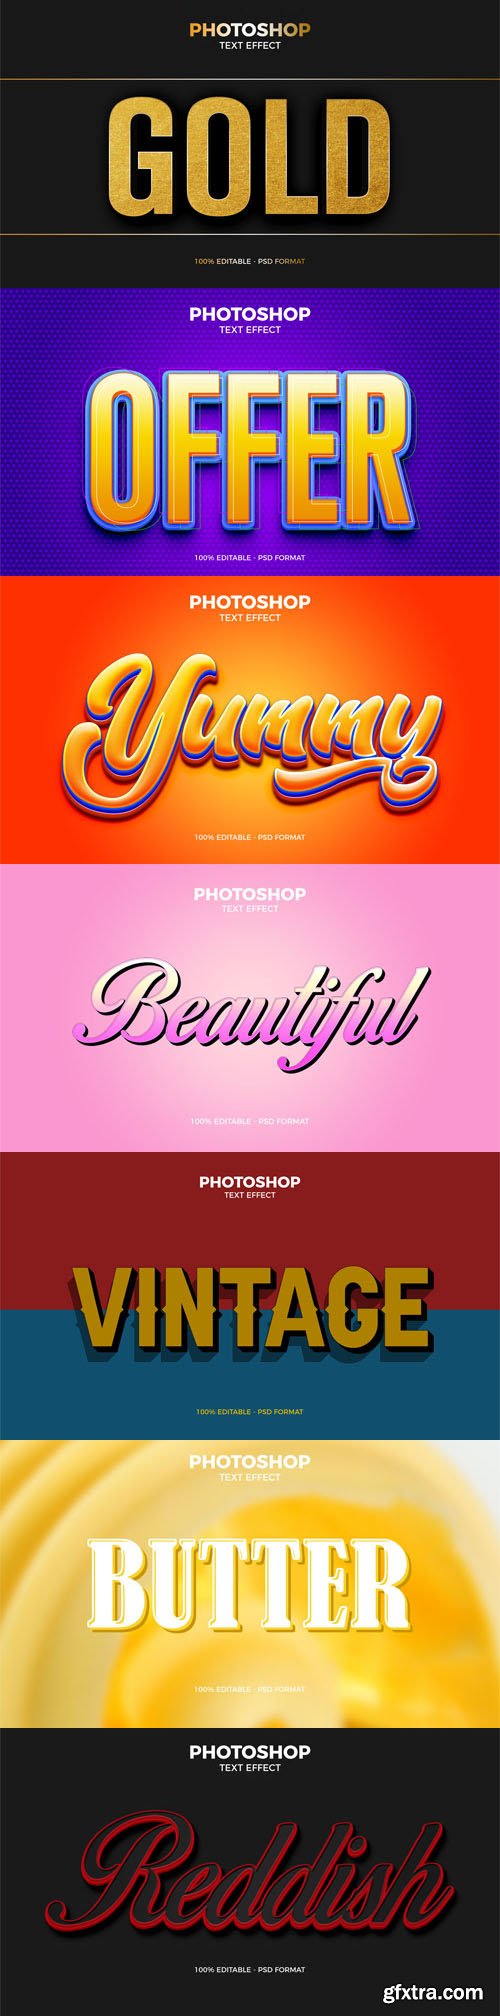 14 Premium Quality Text Effects for Photoshop